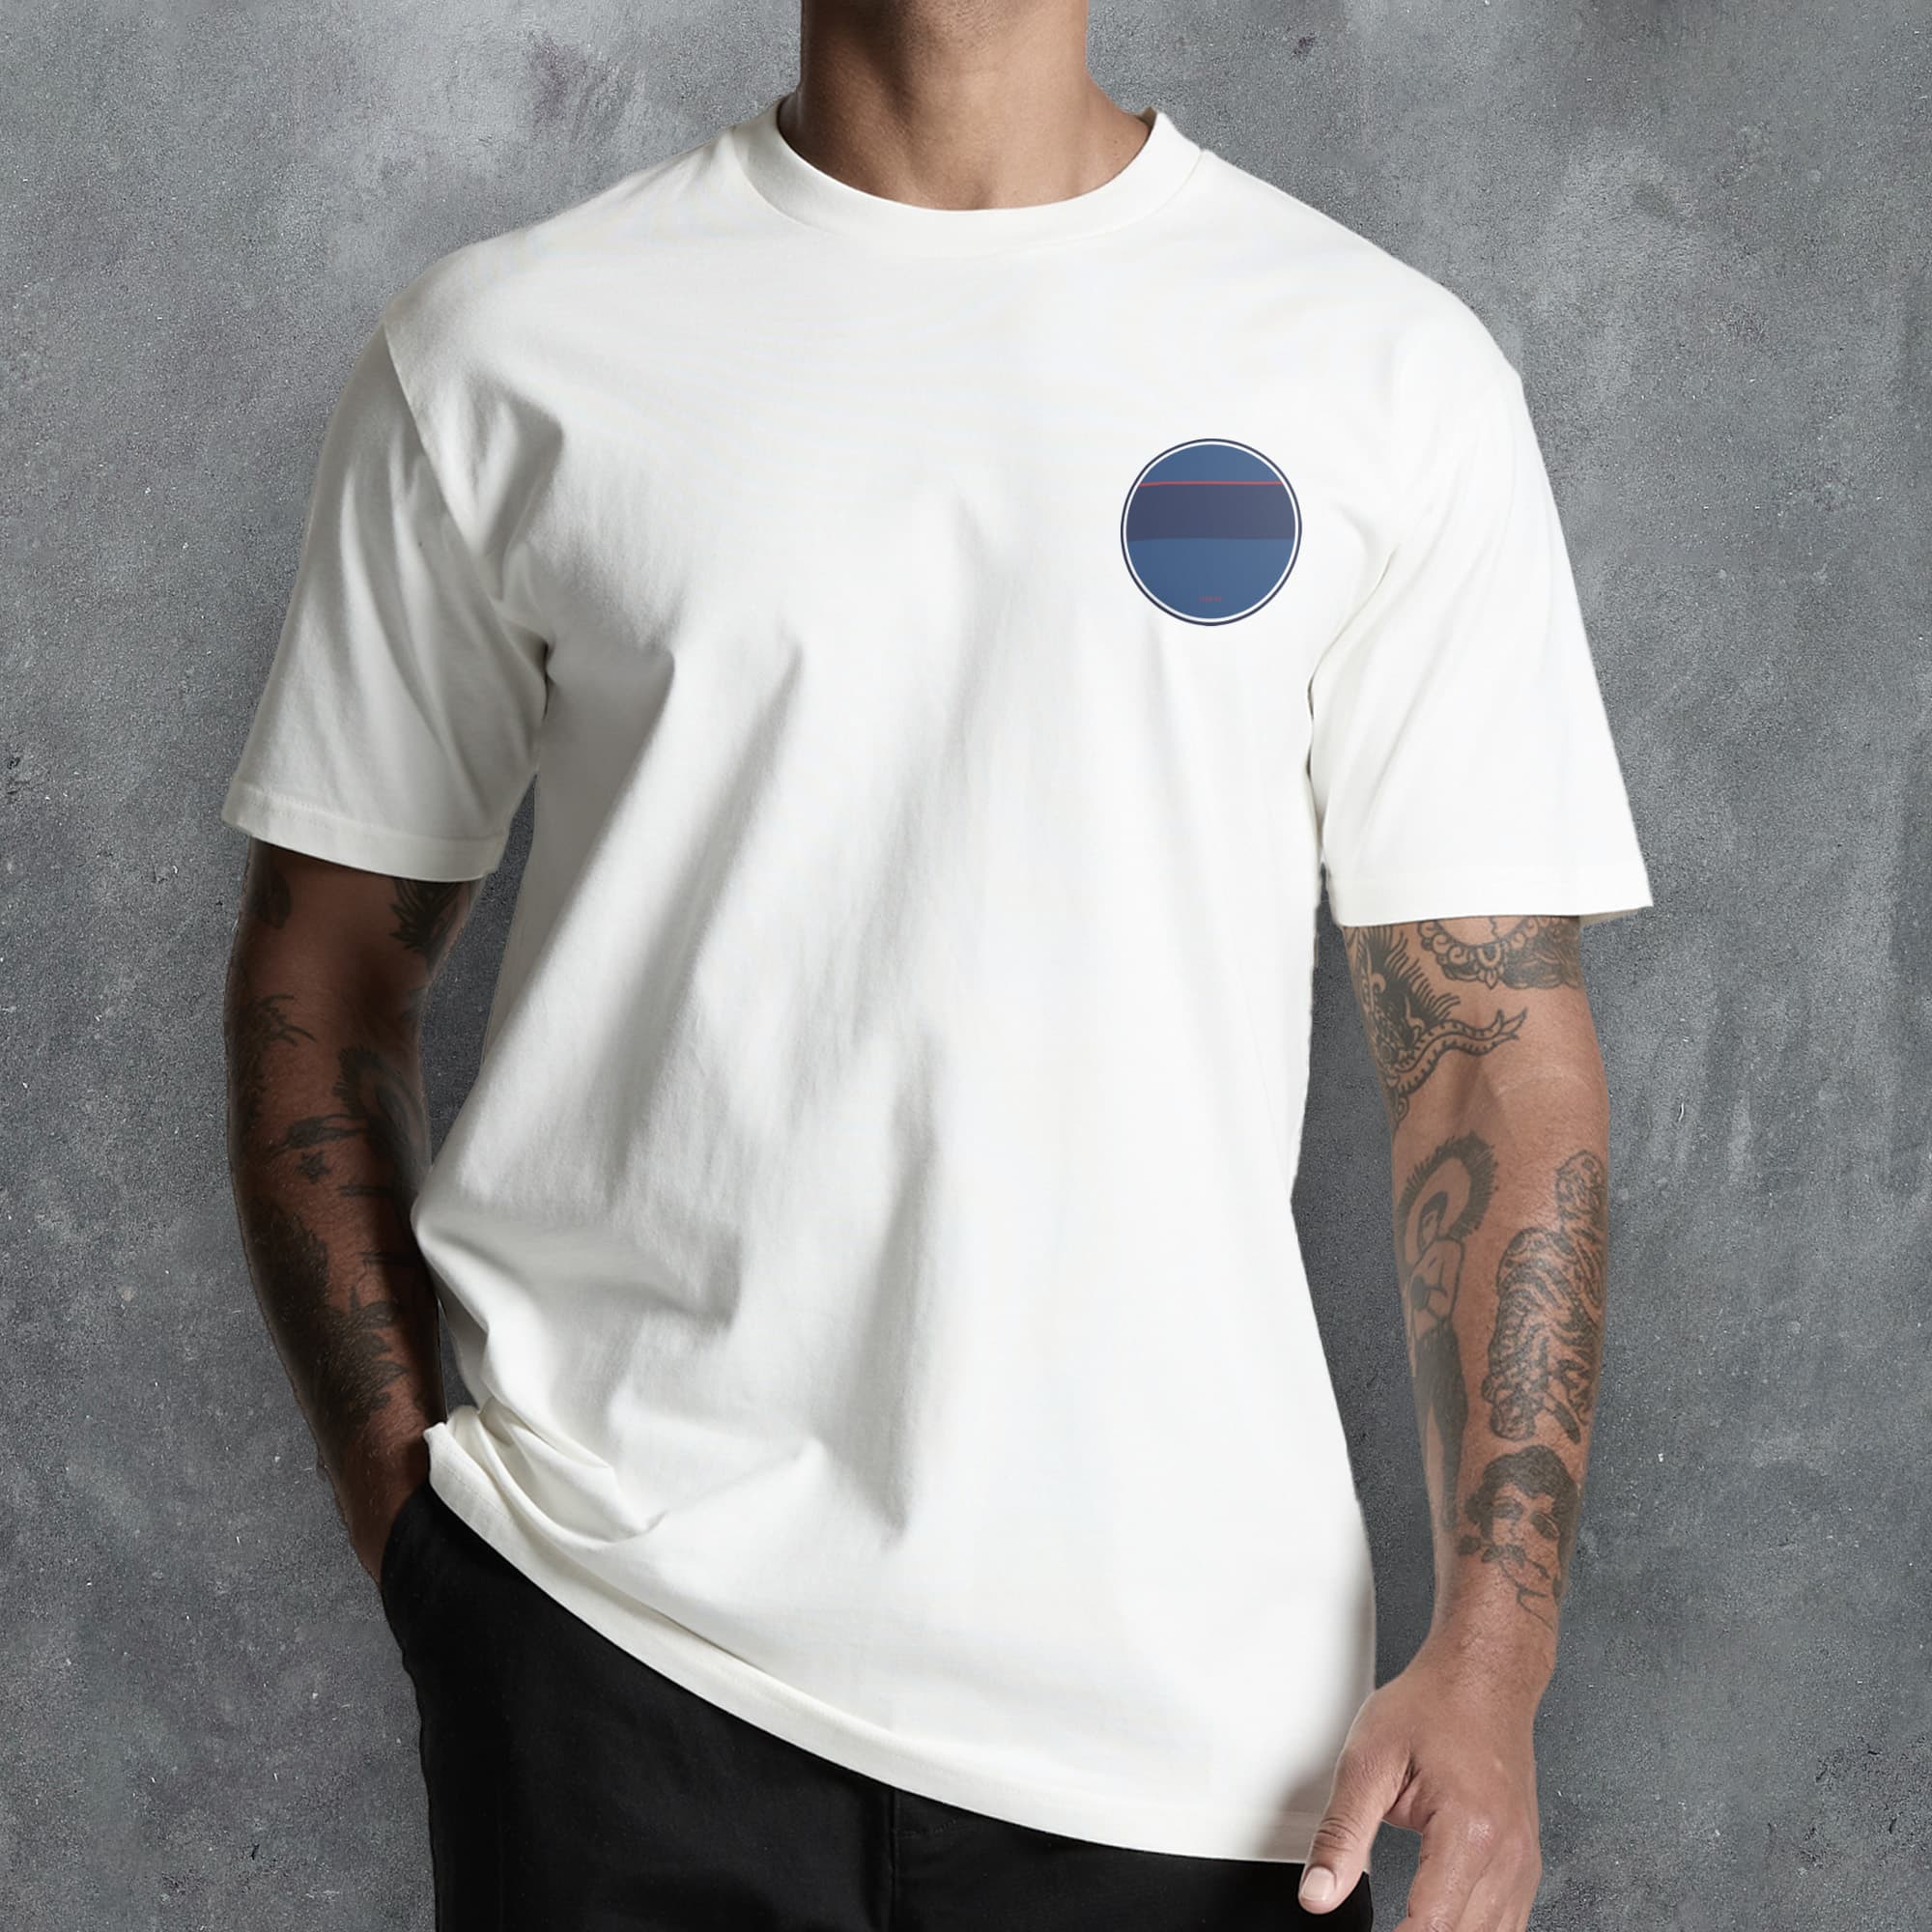 a man wearing a white shirt with a blue circle on it